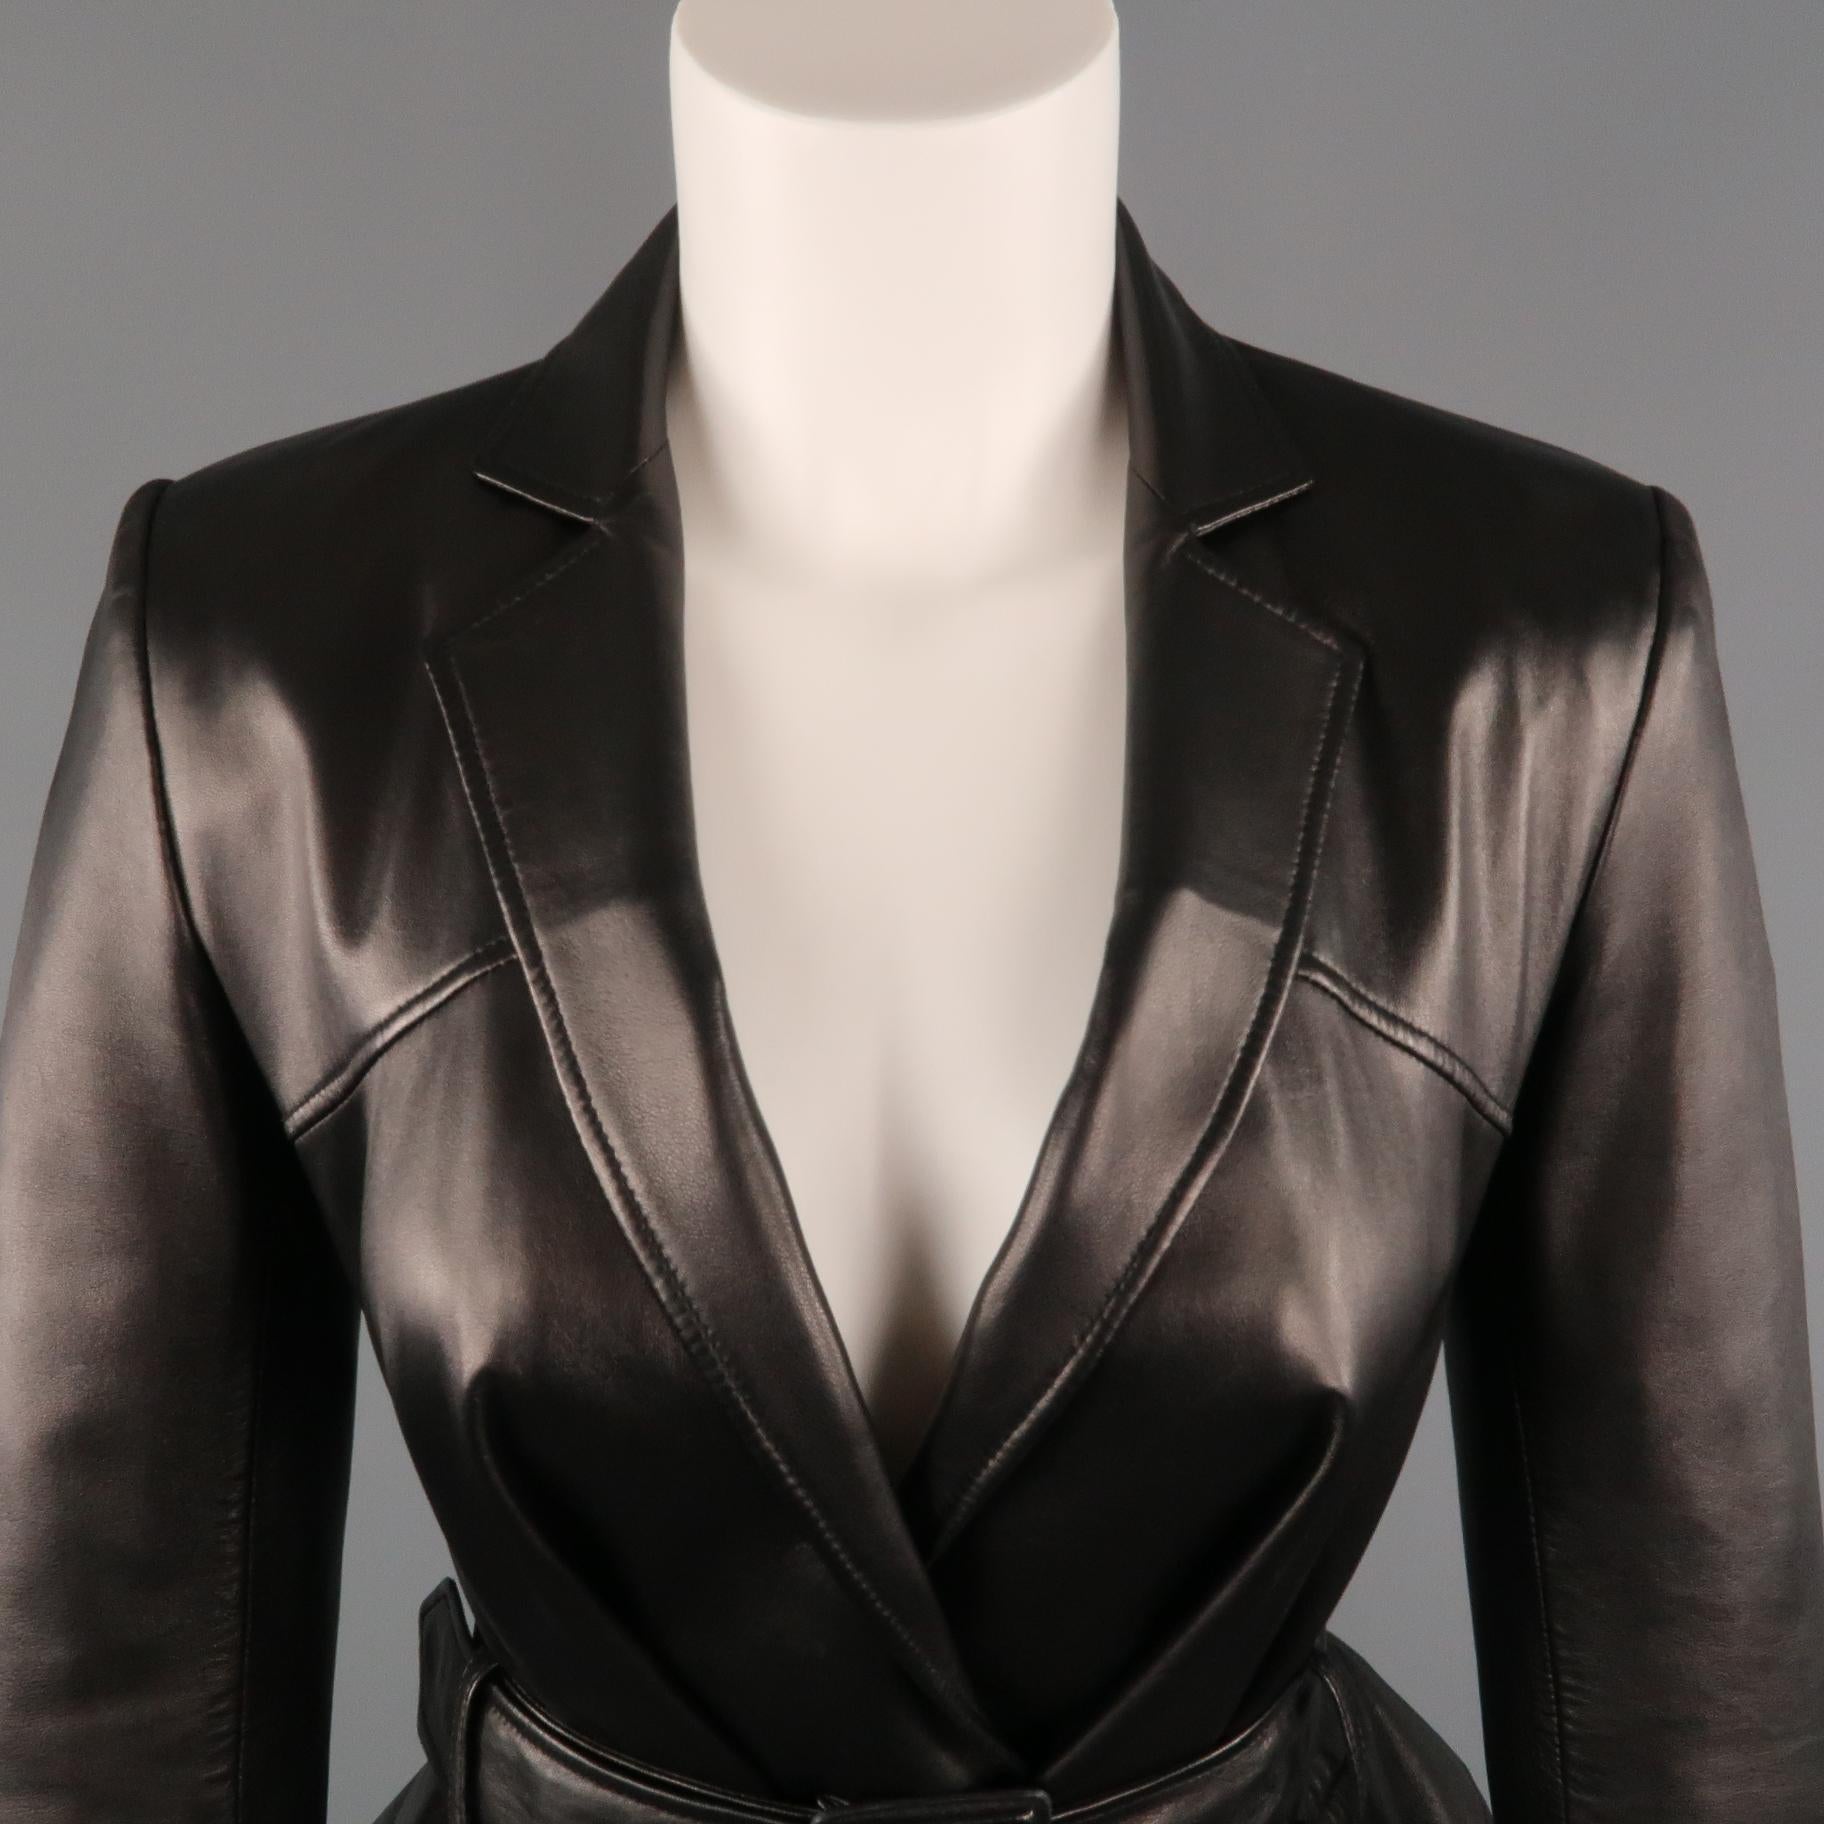 Archive CHRISTIAN DIOR BOUTIQUE by JOHN GALLIANO blazer comes in smooth black leather with a notch lapel, deep v neckline, mock flap pocket sides, and oversized cut that works into a peplum when belted. Made in Italy.
 
Excellent Pre-Owned